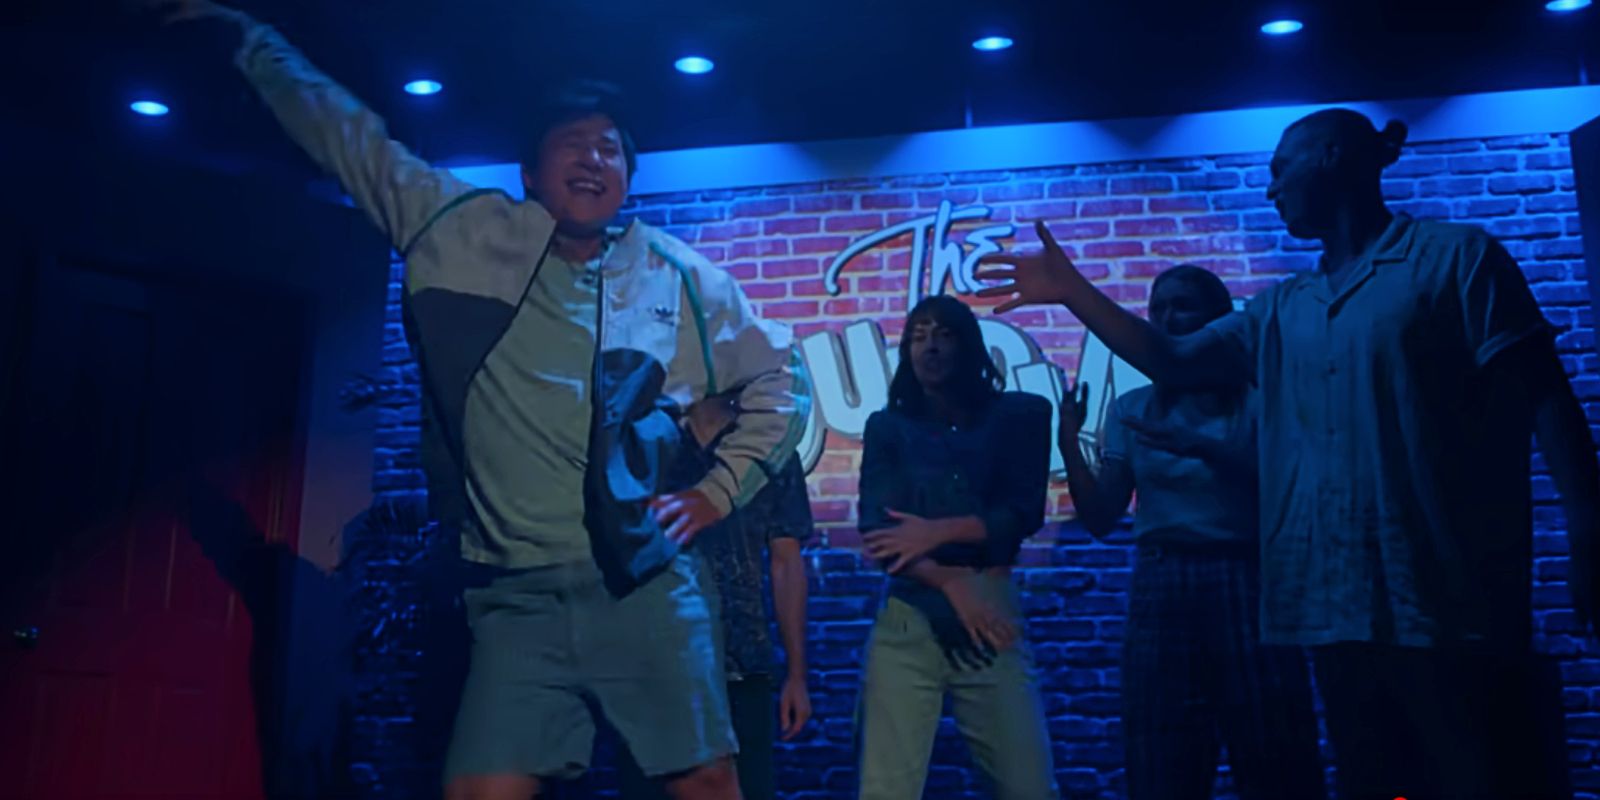 Bruce dances on stage during his improv show in The Brothers Sun.